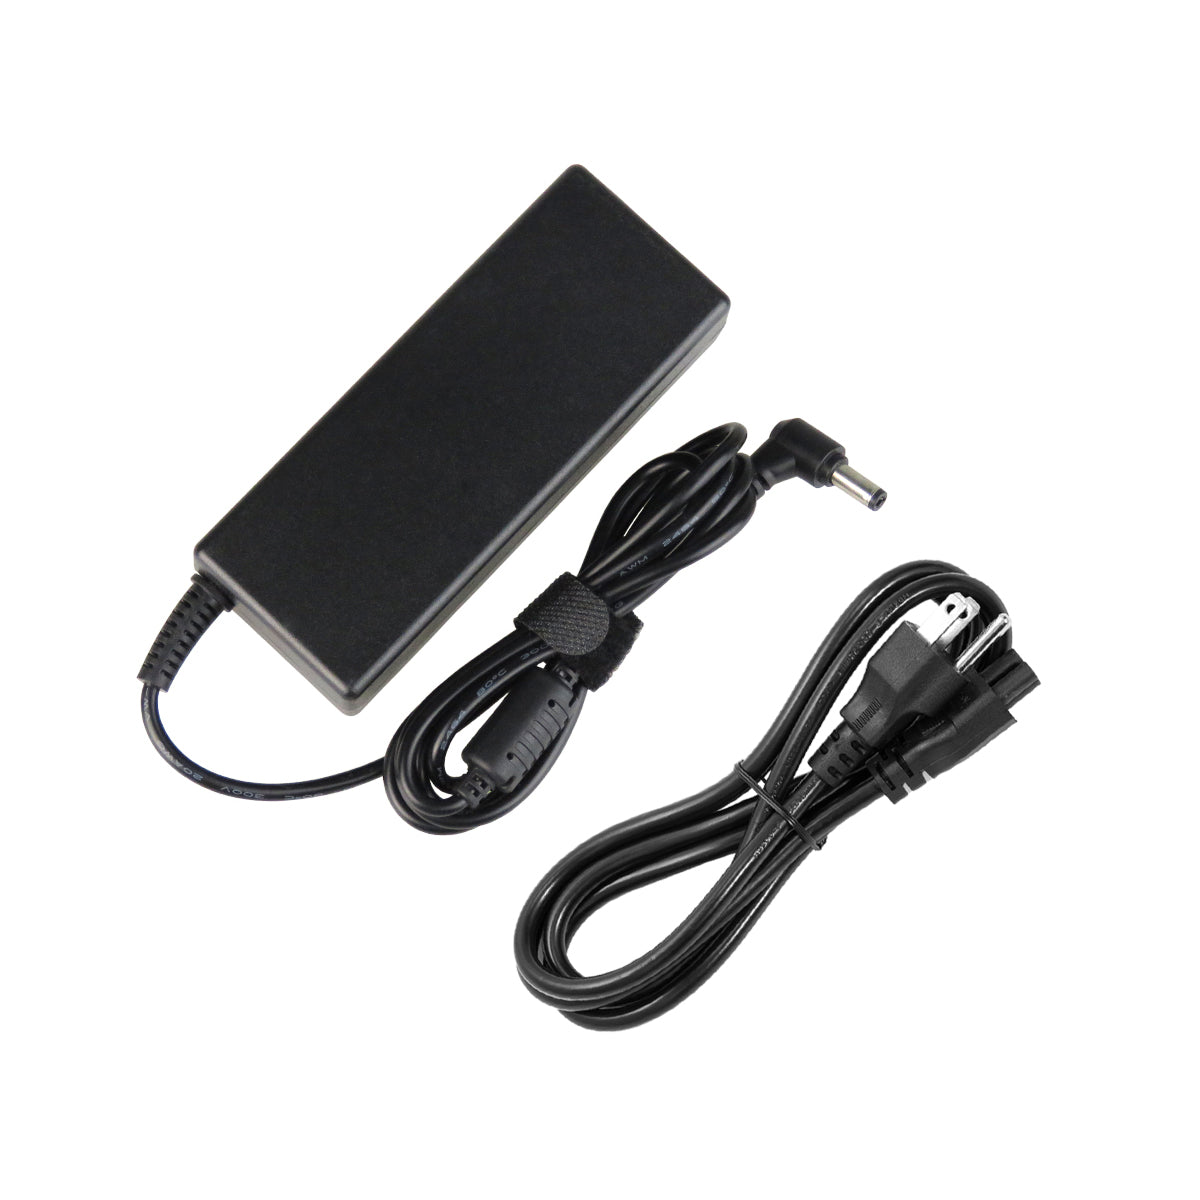 AC Adapter Charger for ASUS P41S Notebook.